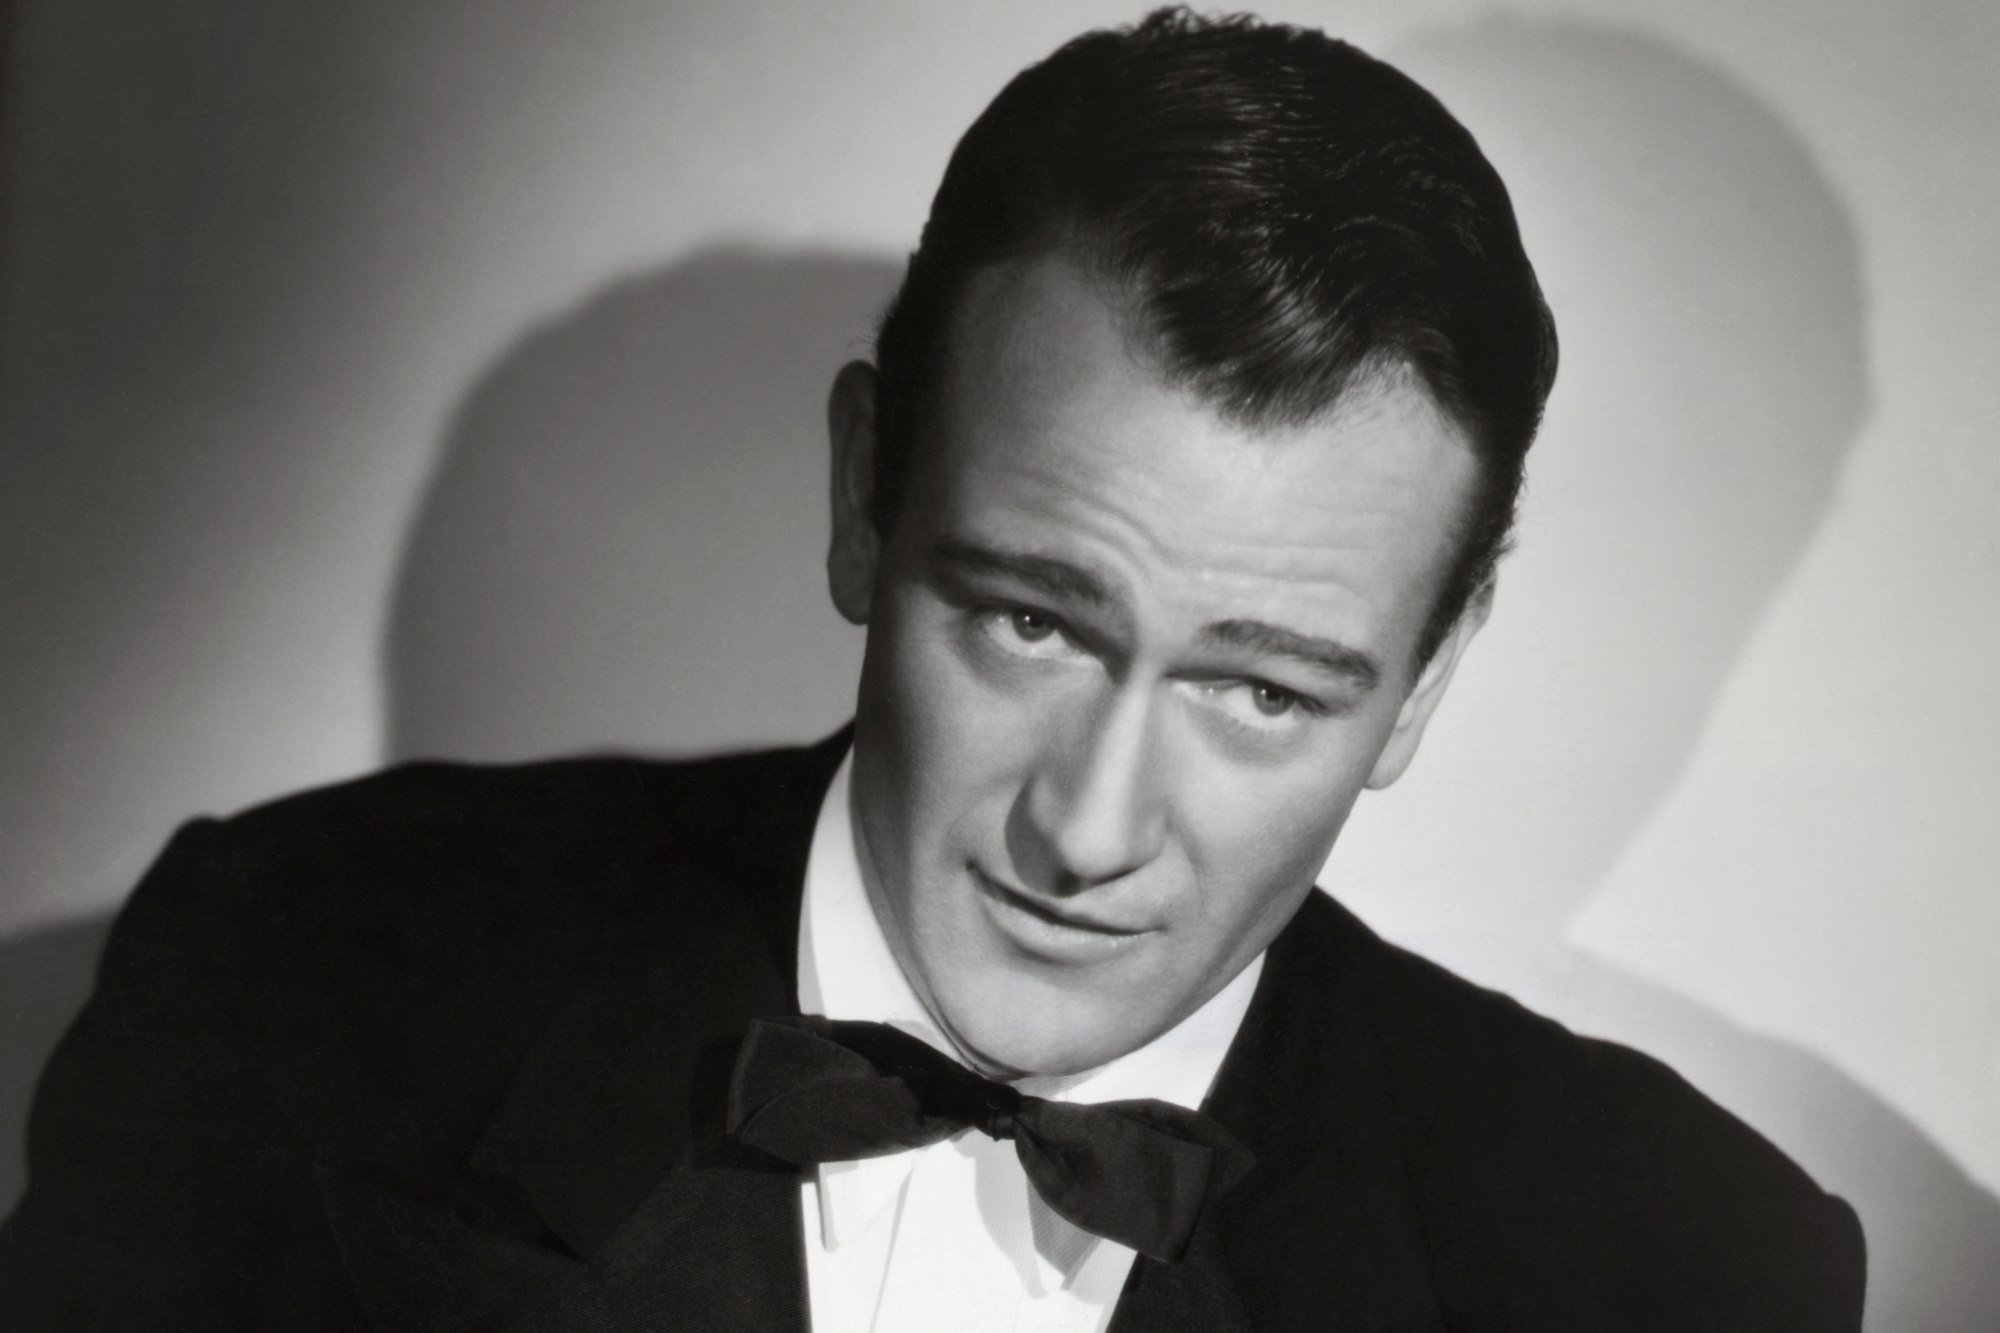 John Wayne, an inspiration to many actors, in a black-and-white portrait photo in a tuxedo.